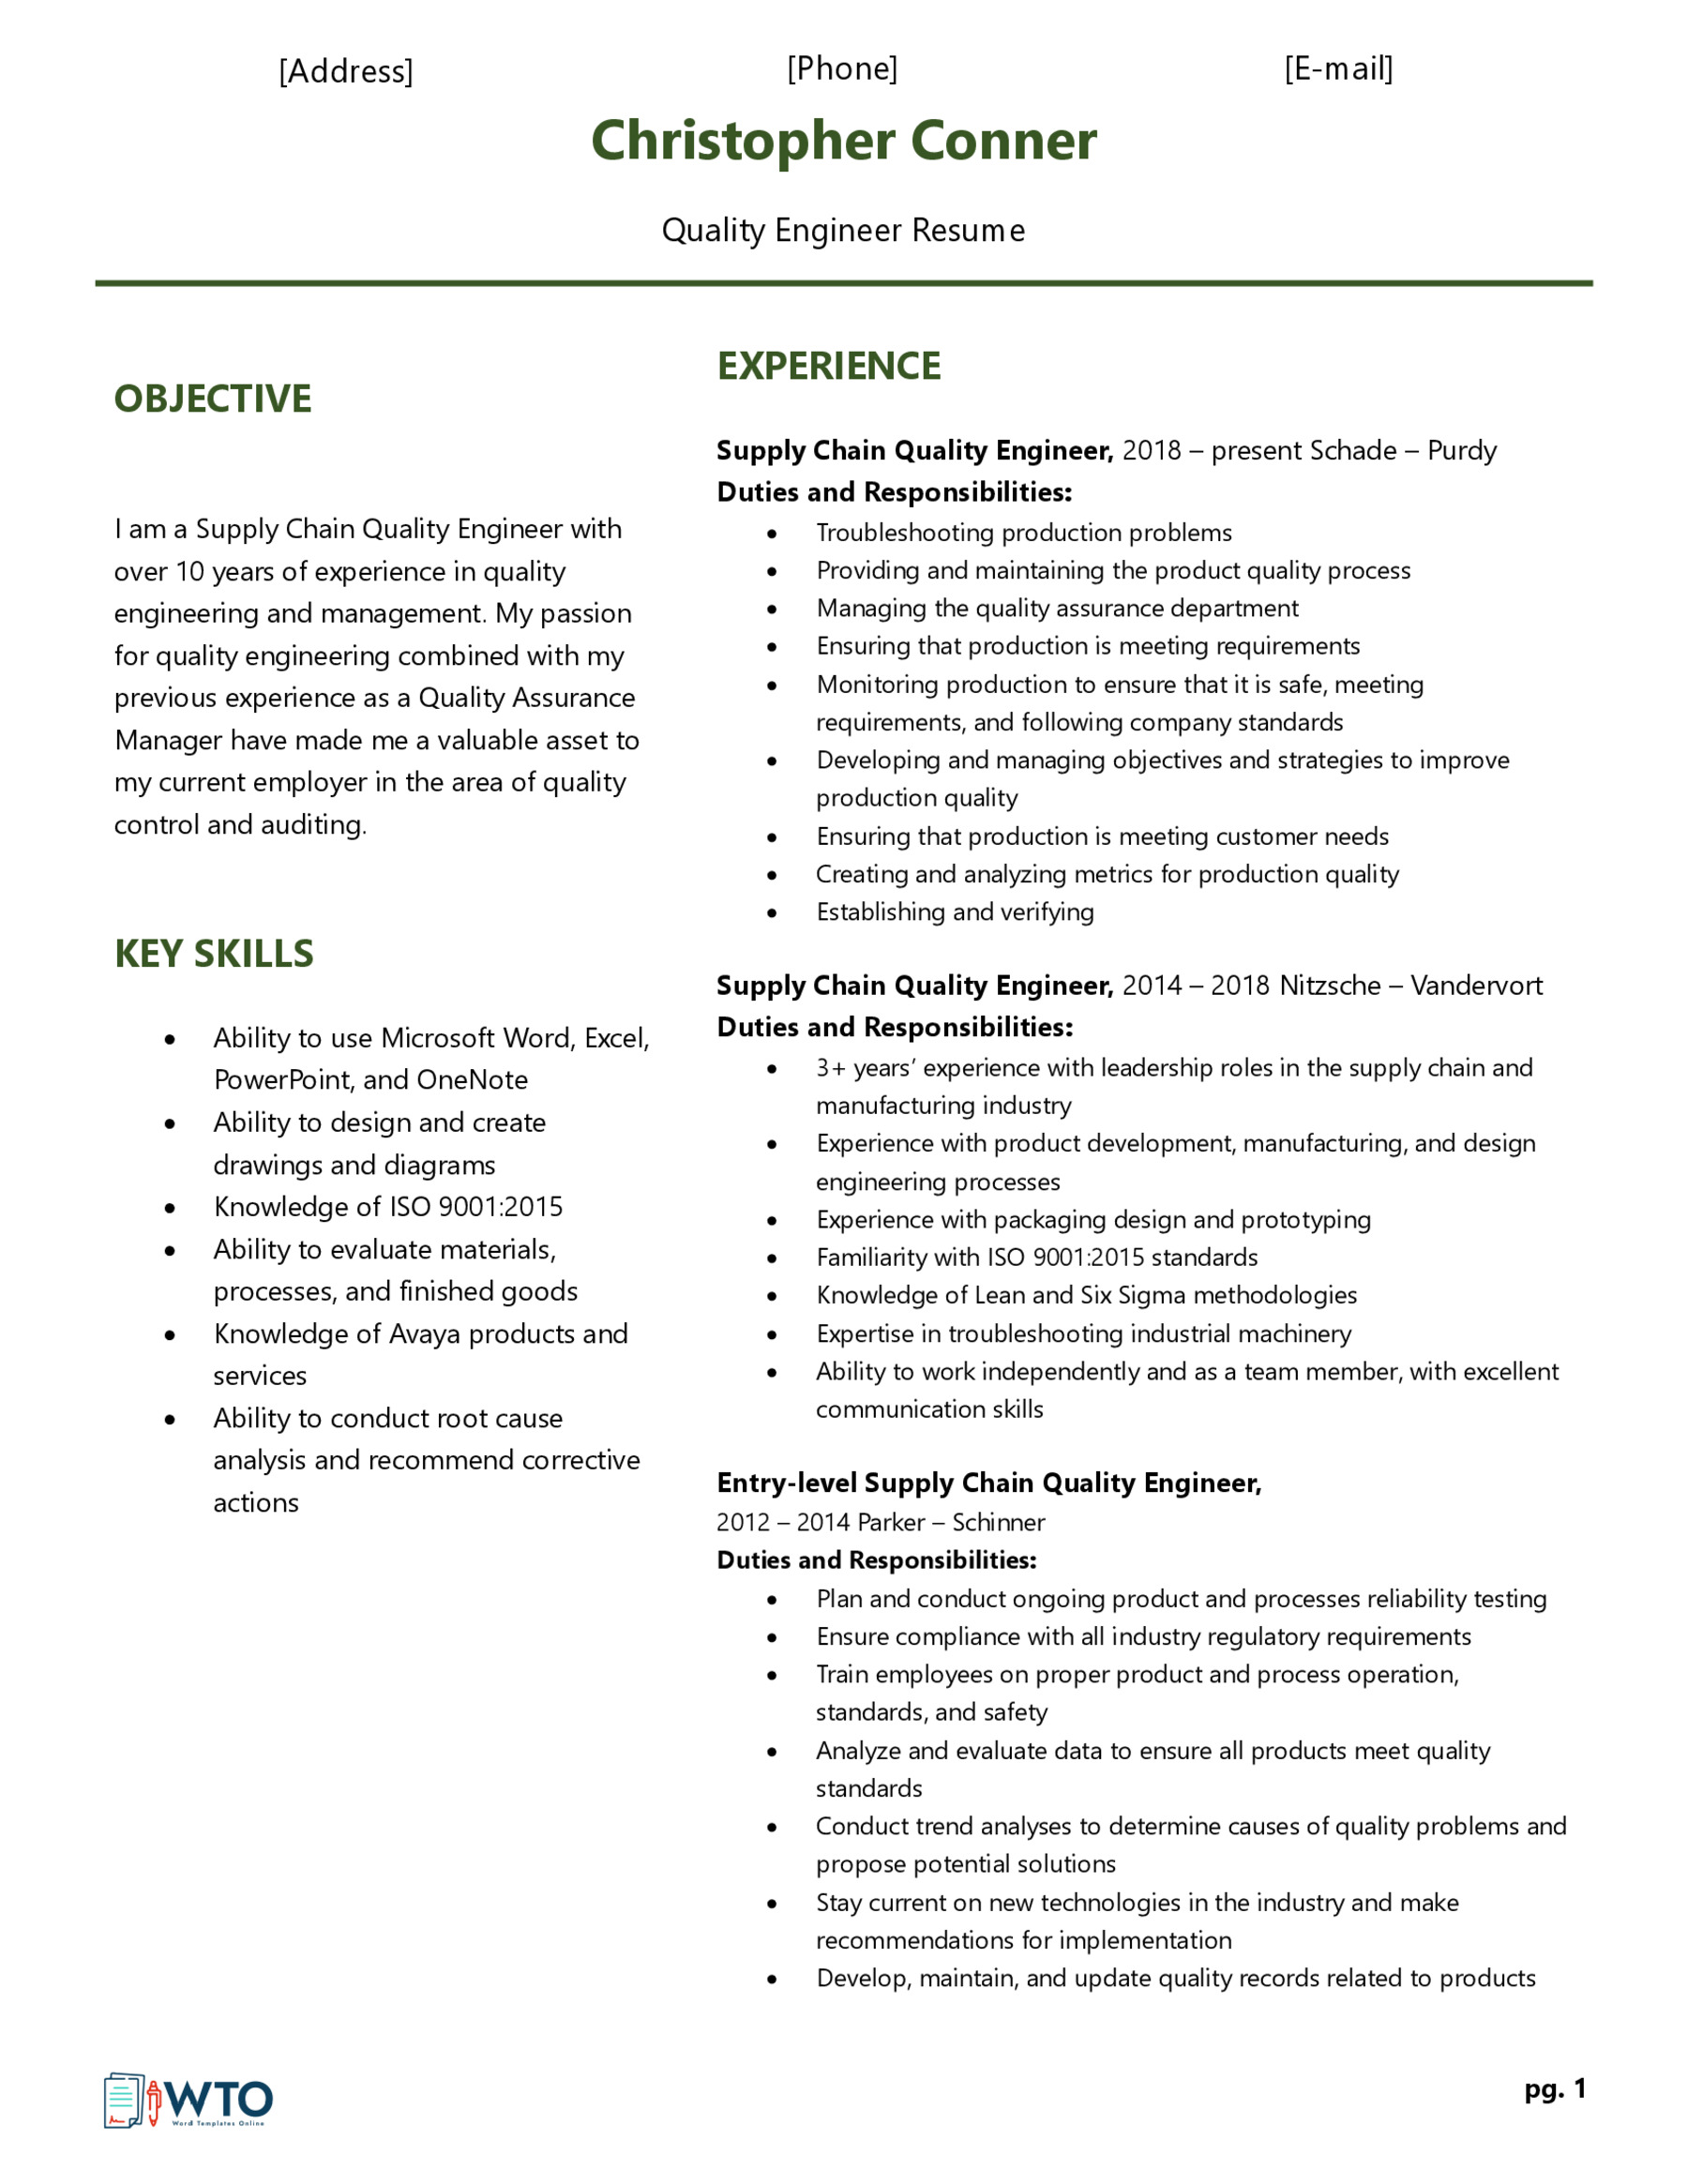 Quality Engineer Resume Example - Professional Sample